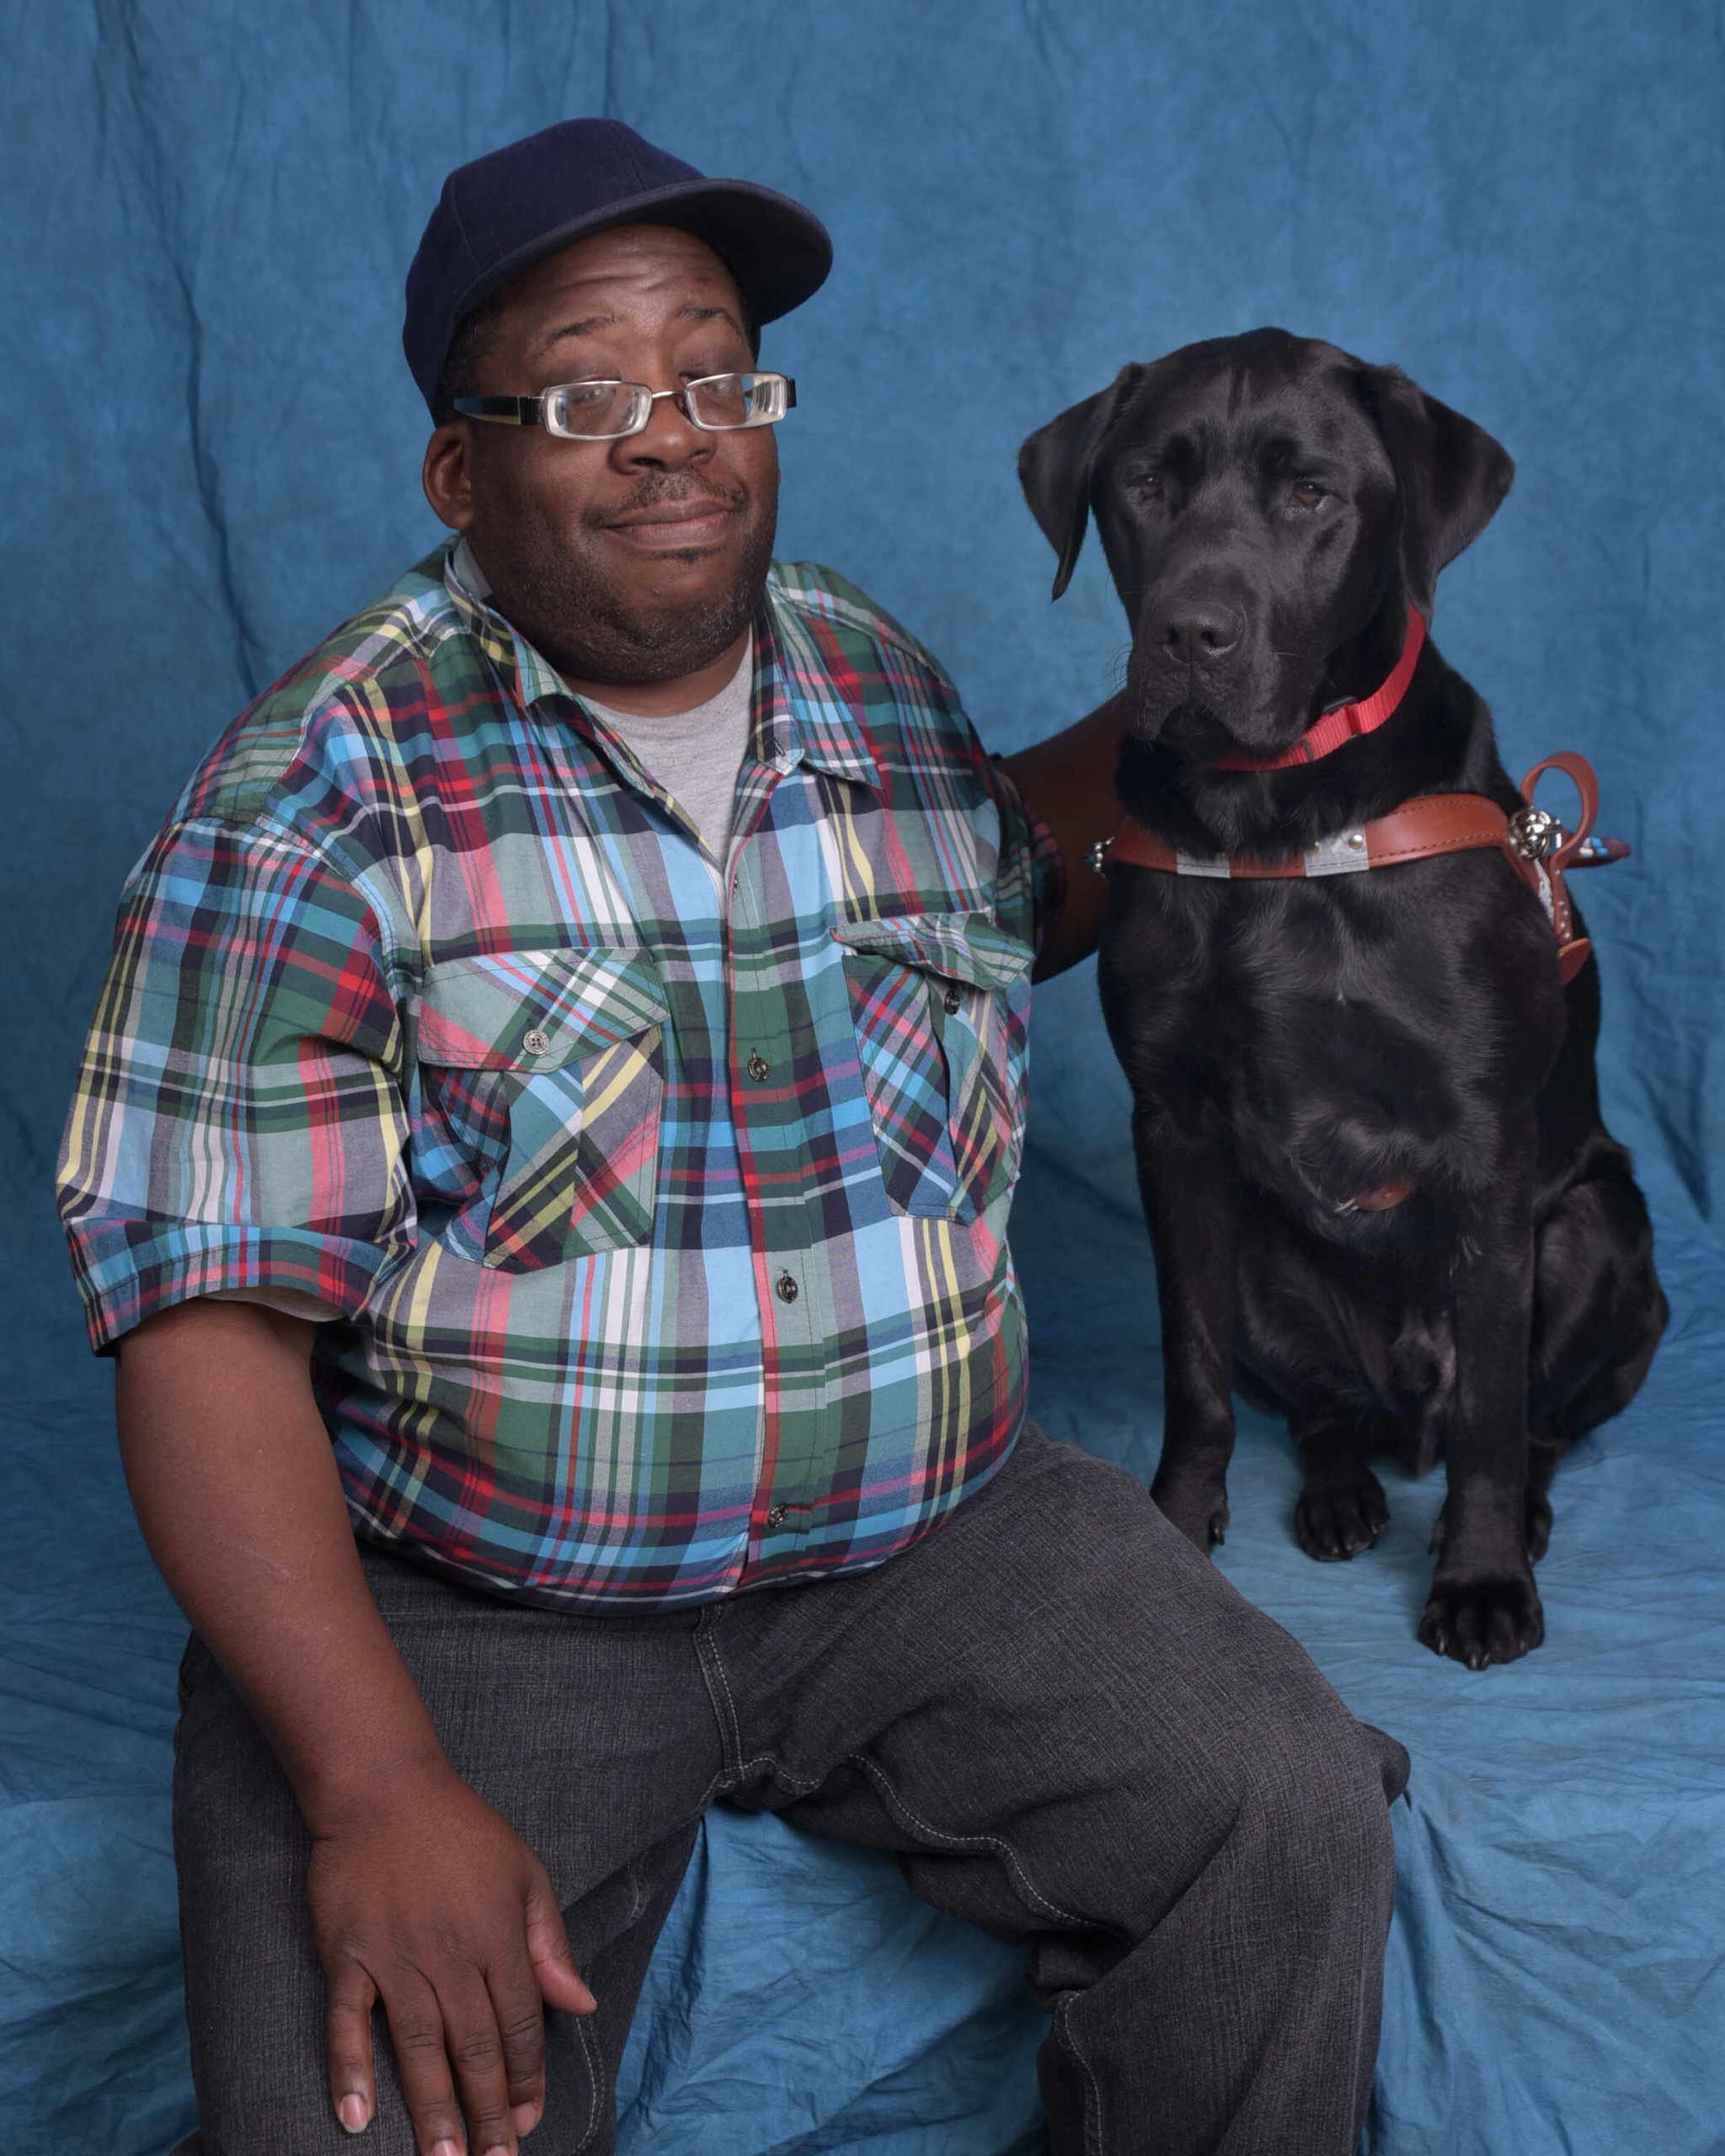 James and Vern, a black lab guide dog in harness.